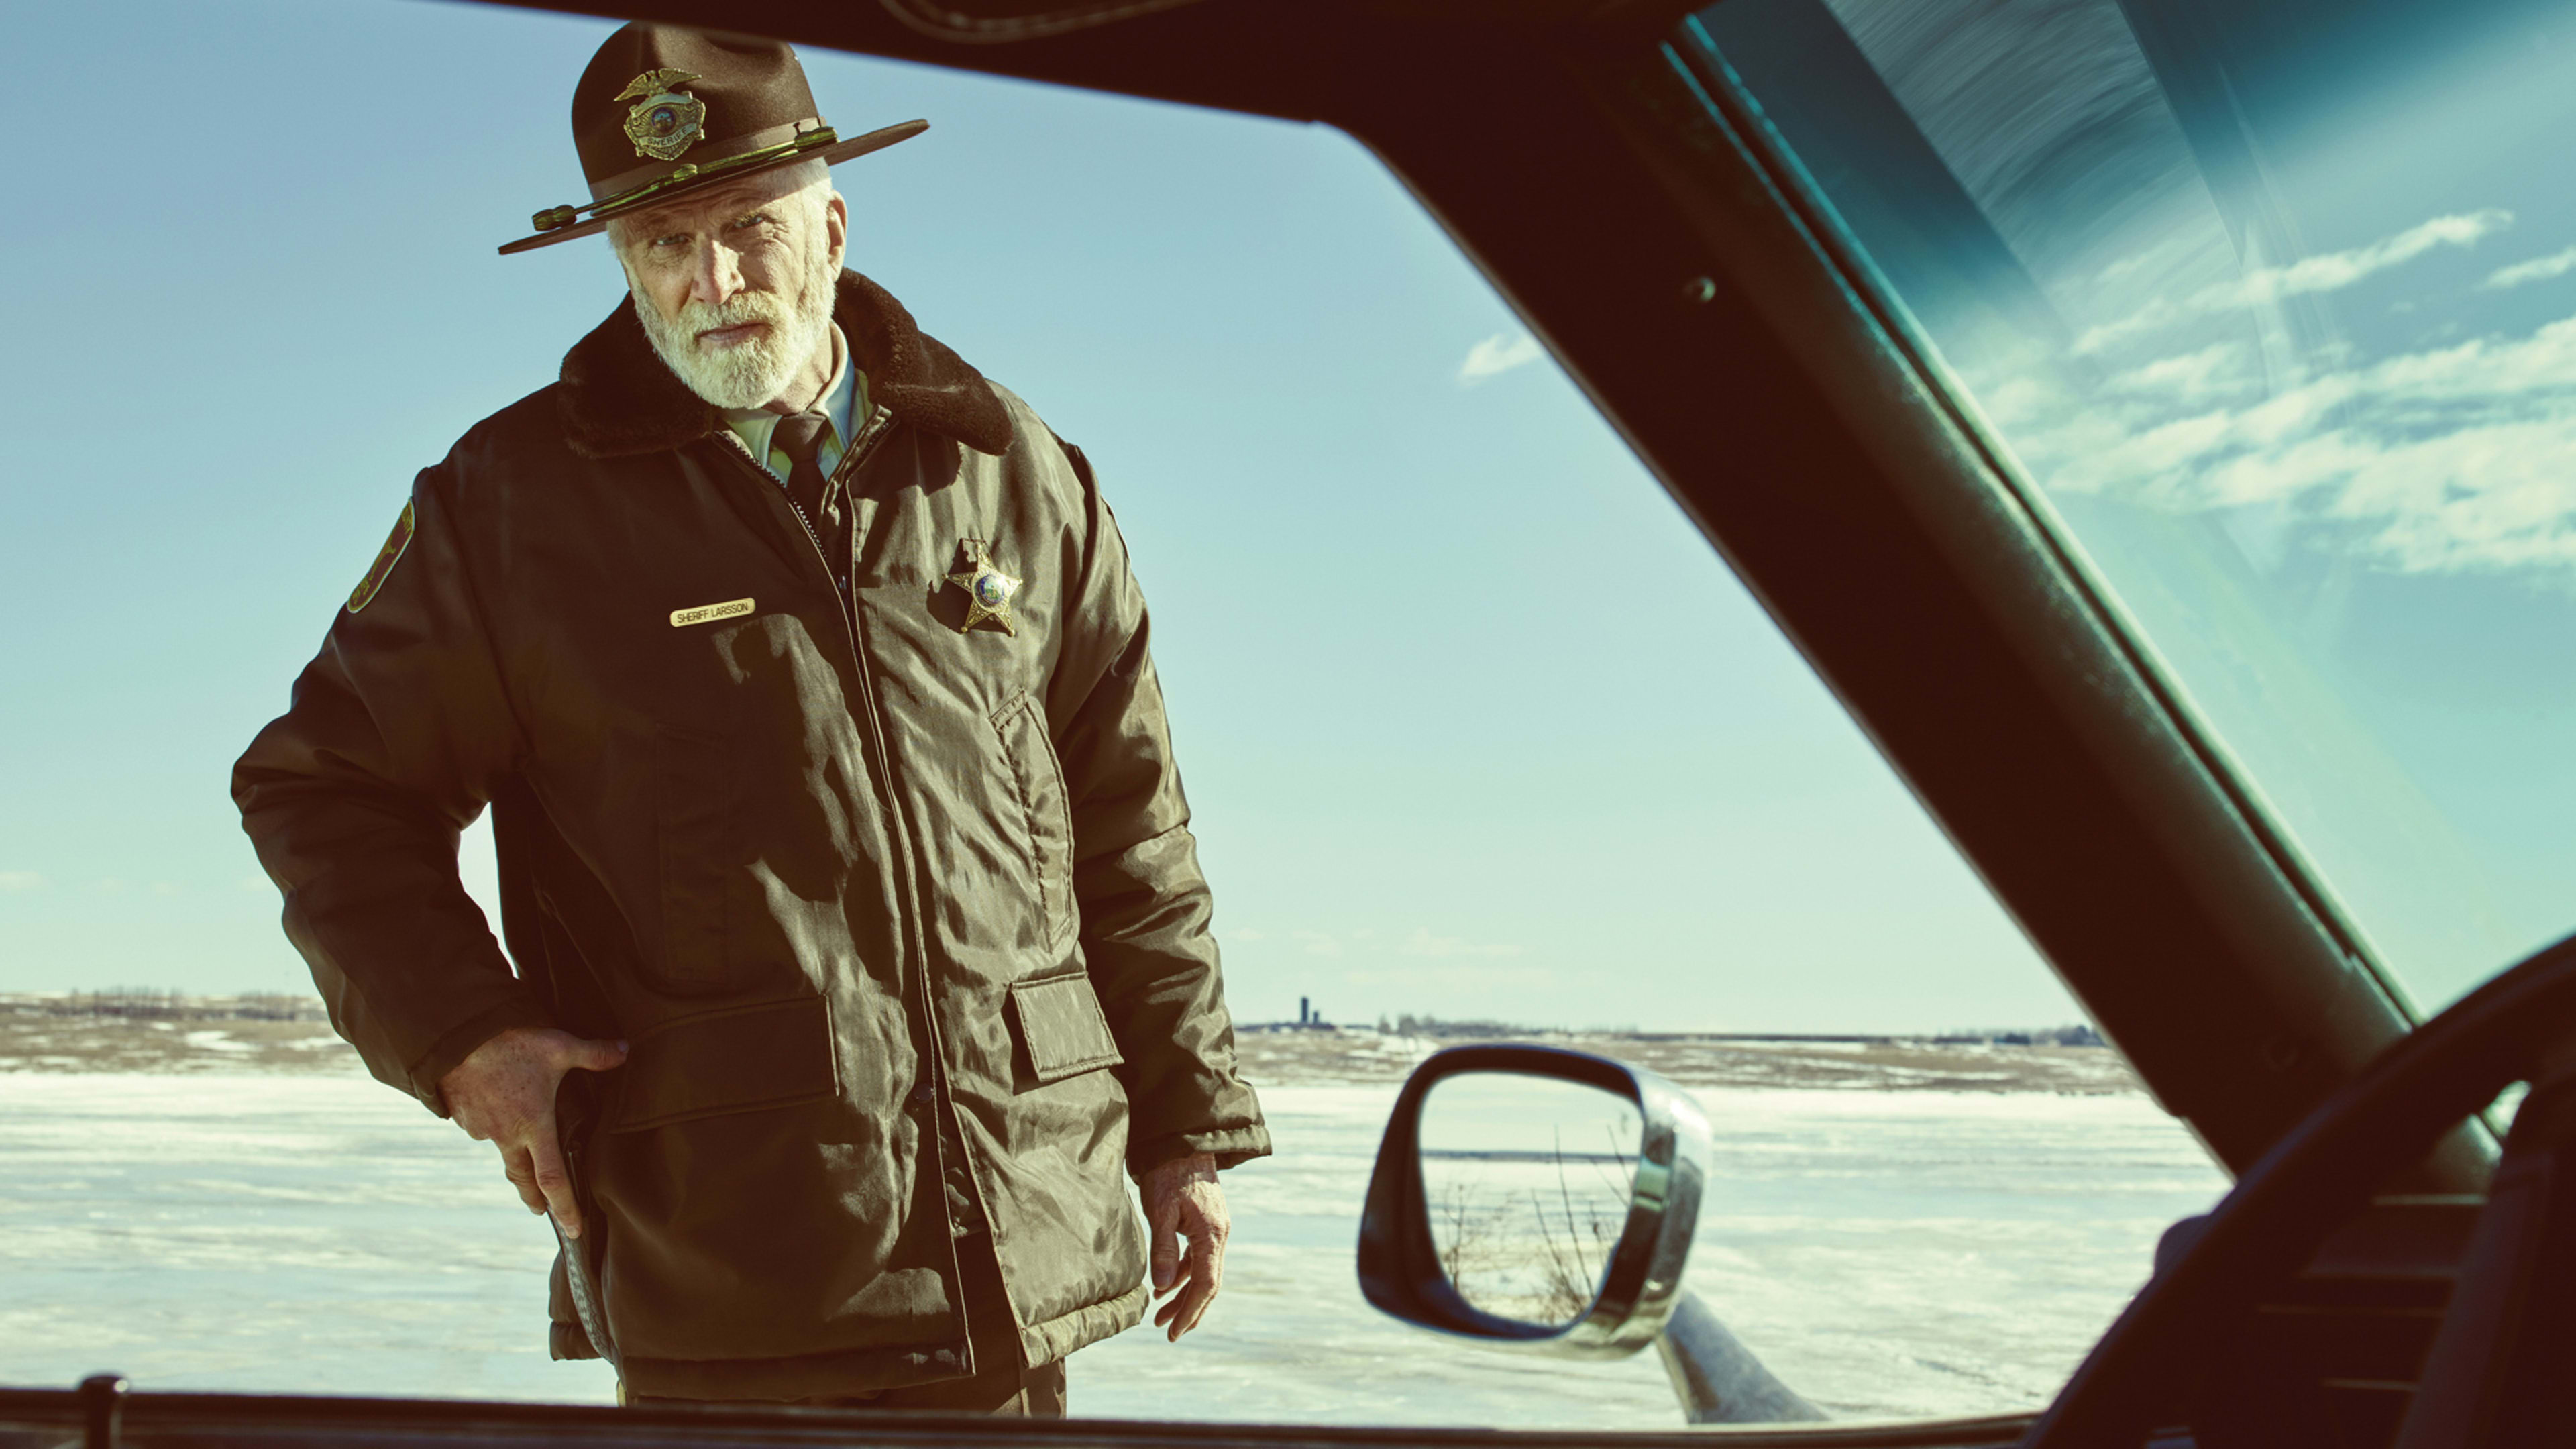 Black Humor, White Snow, Red Blood: “Fargo” Producer Starts From Scratch For Season 2